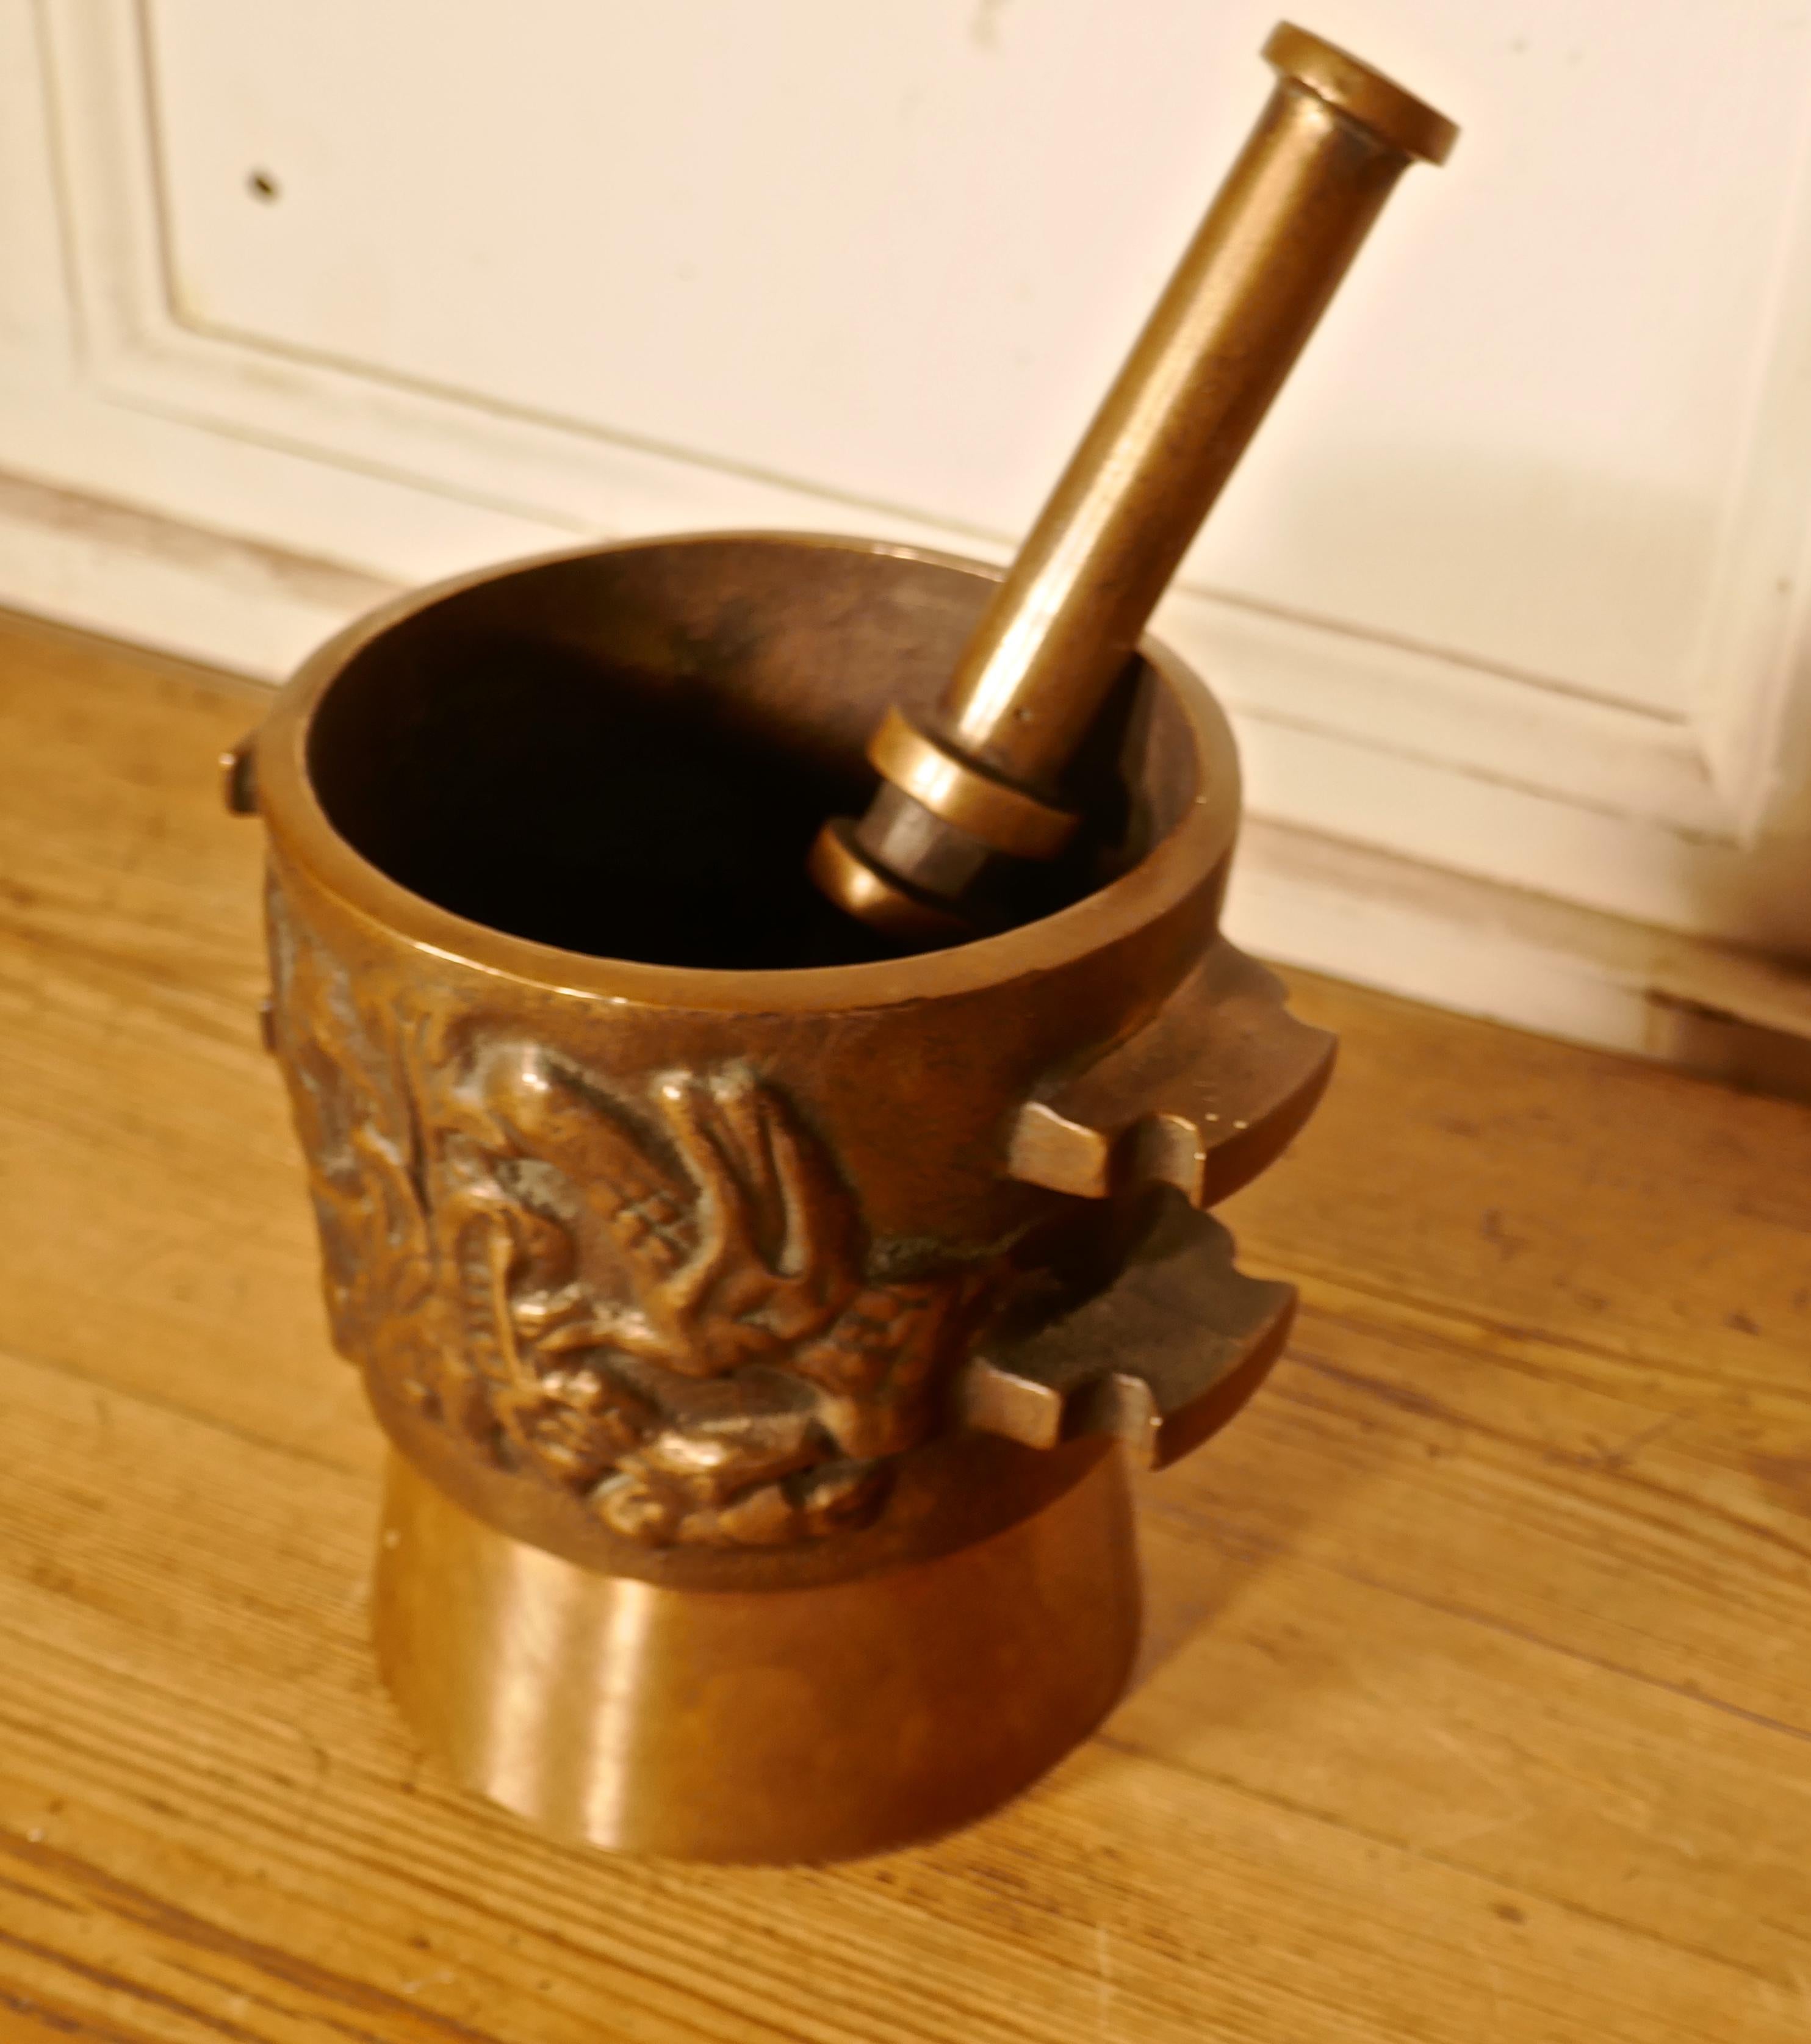 Oriental bronze pestle and mortar 

An unusual pair probably made for the preparation of herbal treatments rather than for culinary use The mortar is clean inside so it could be used in your kitchen, this is a very heavy pair, the bronze is